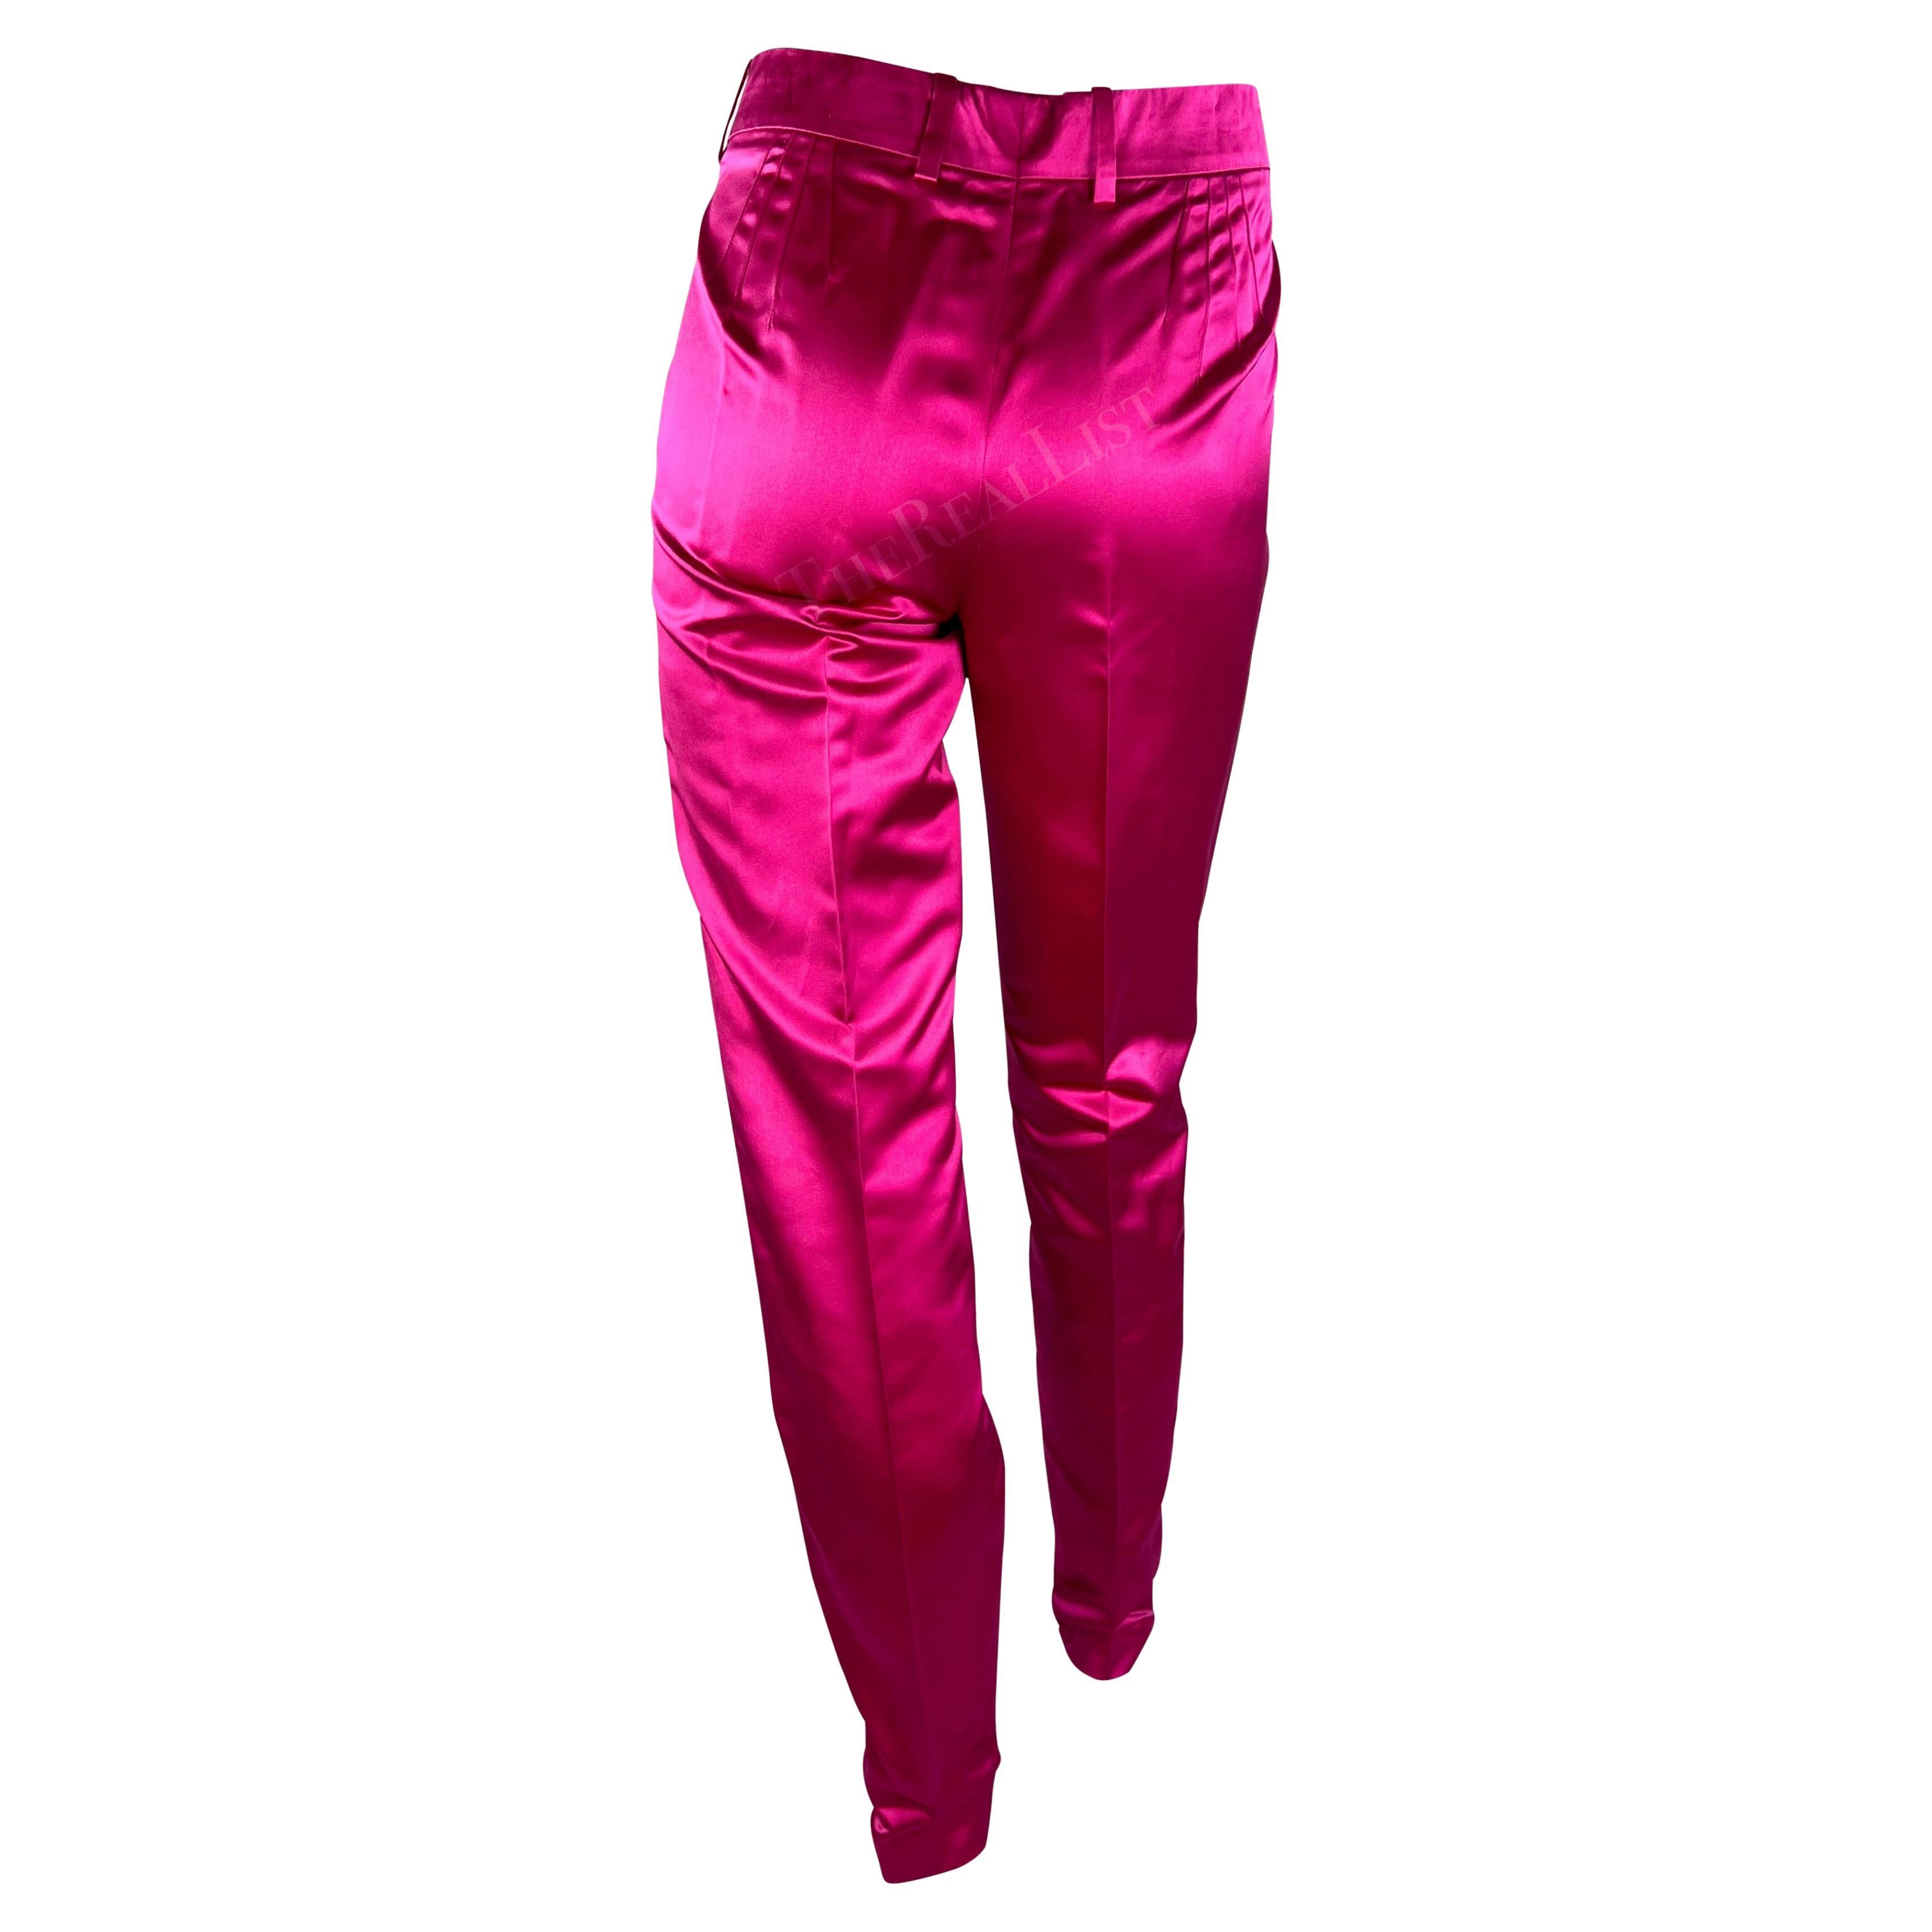 S/S 2001 Gucci by Tom Ford Runway Hot Pink Satin Silk Blend Tapered Pants For Sale 2